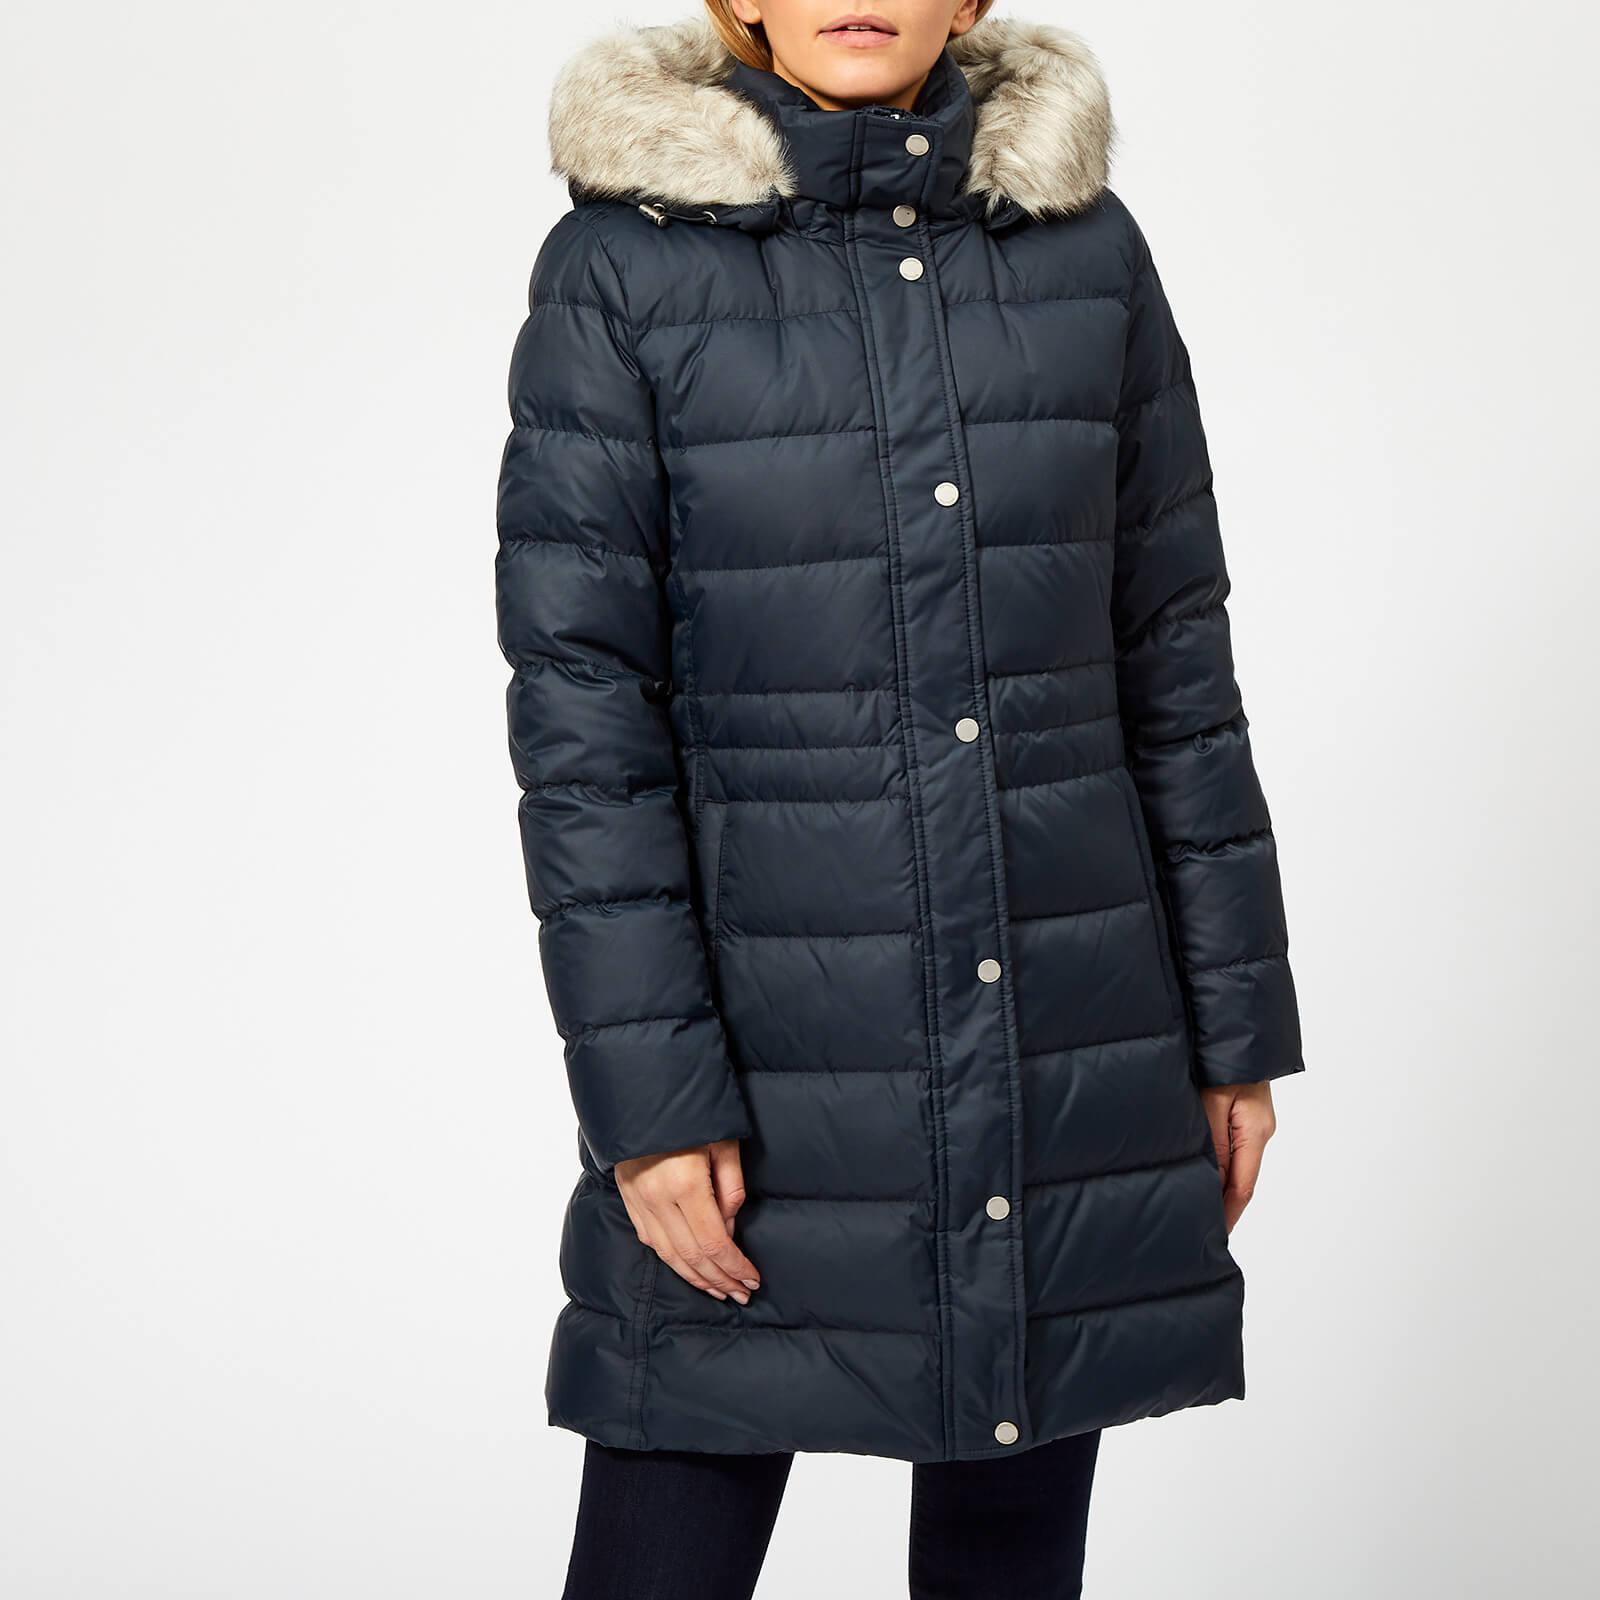 Tommy Hilfiger Tyra Puffer Jacket Finland, SAVE 40% - aveclumiere.com